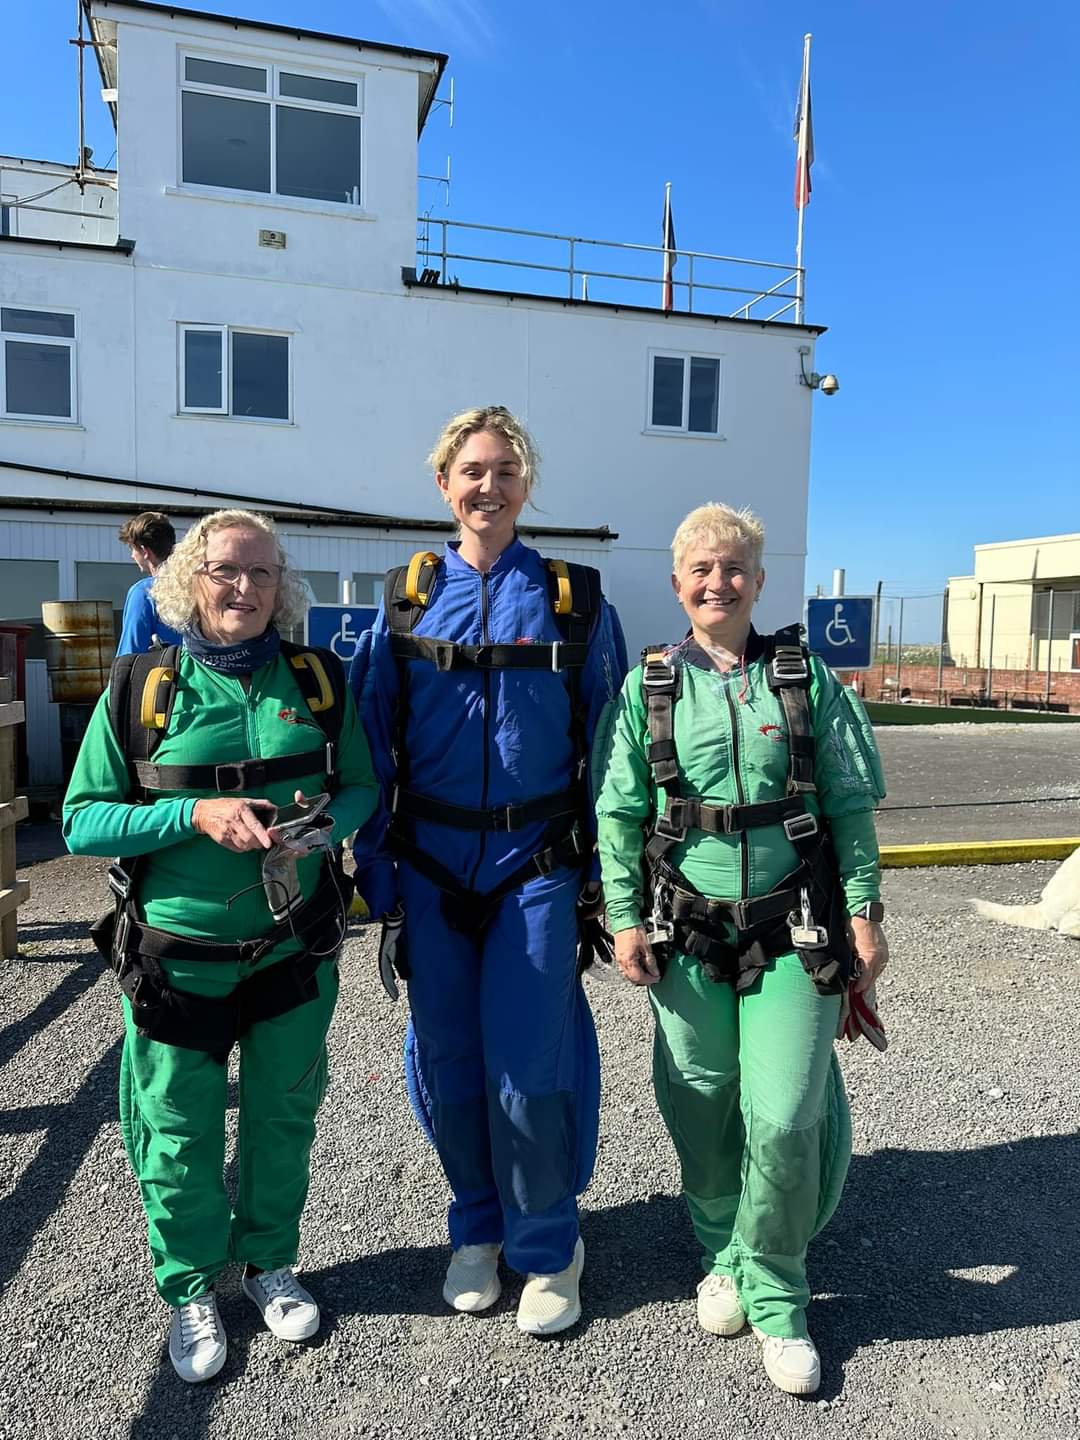 Charity skydive raises £2,000 for Sunderland Ward in South Pembrokeshire